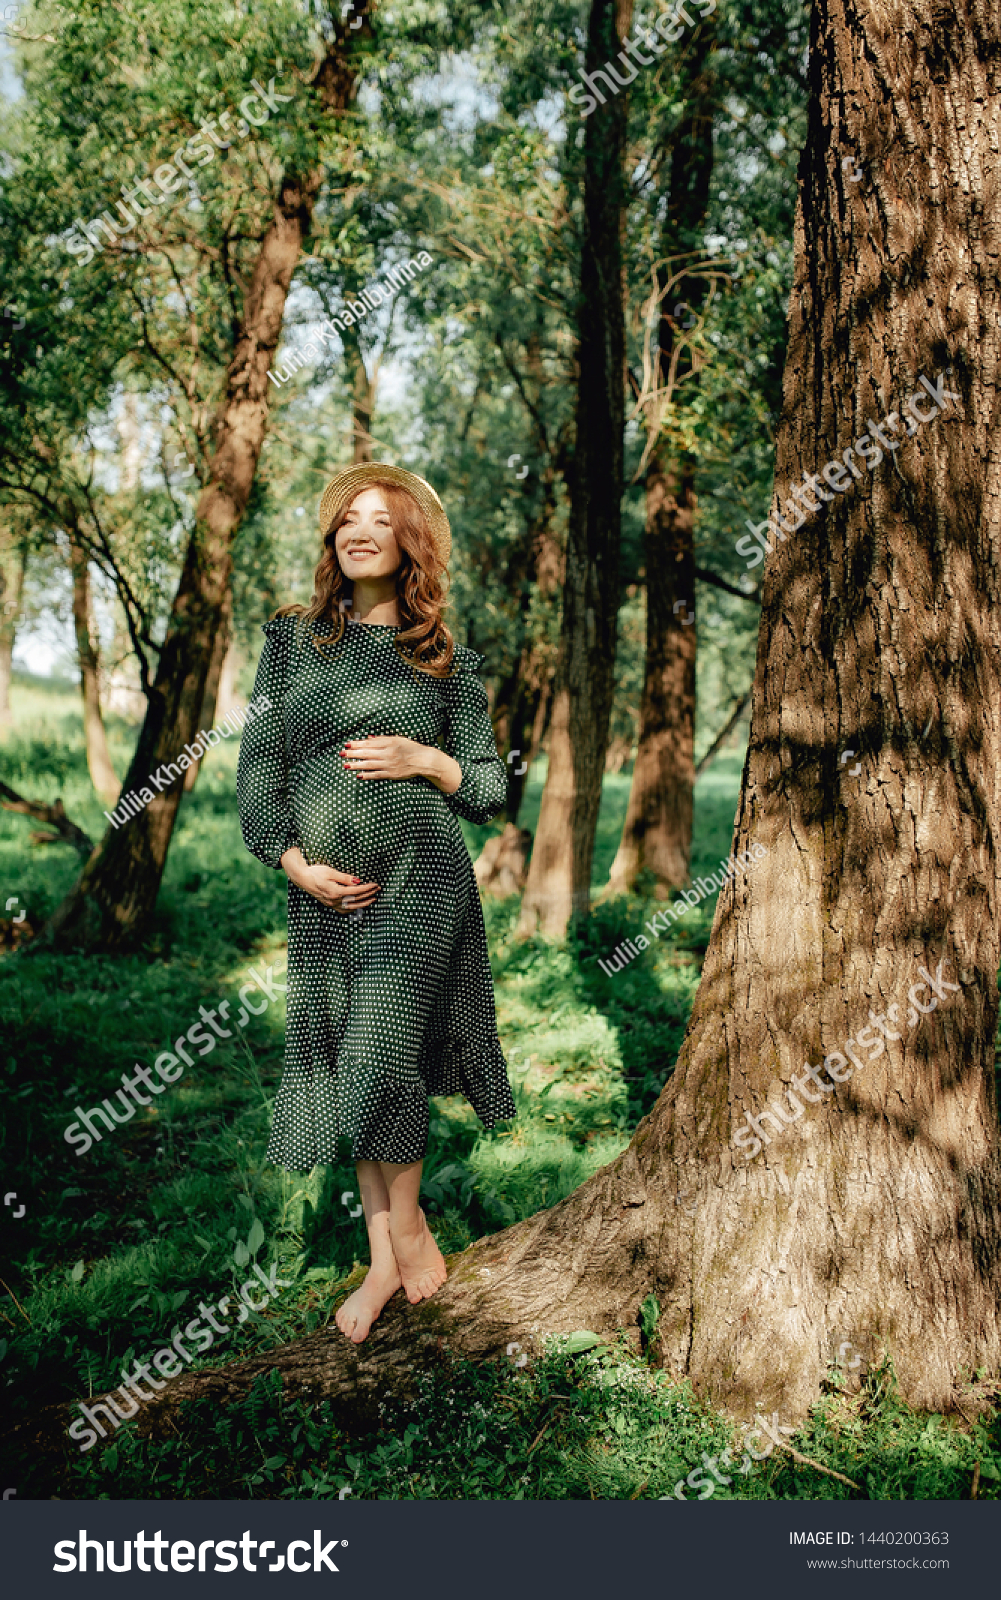 https://image.shutterstock.com/shutterstock/photos/1440200363/display_1500/stock-photo-pregnant-woman-posing-in-a-green-park-young-happy-pregnant-woman-relaxing-and-enjoying-life-in-1440200363.jpg